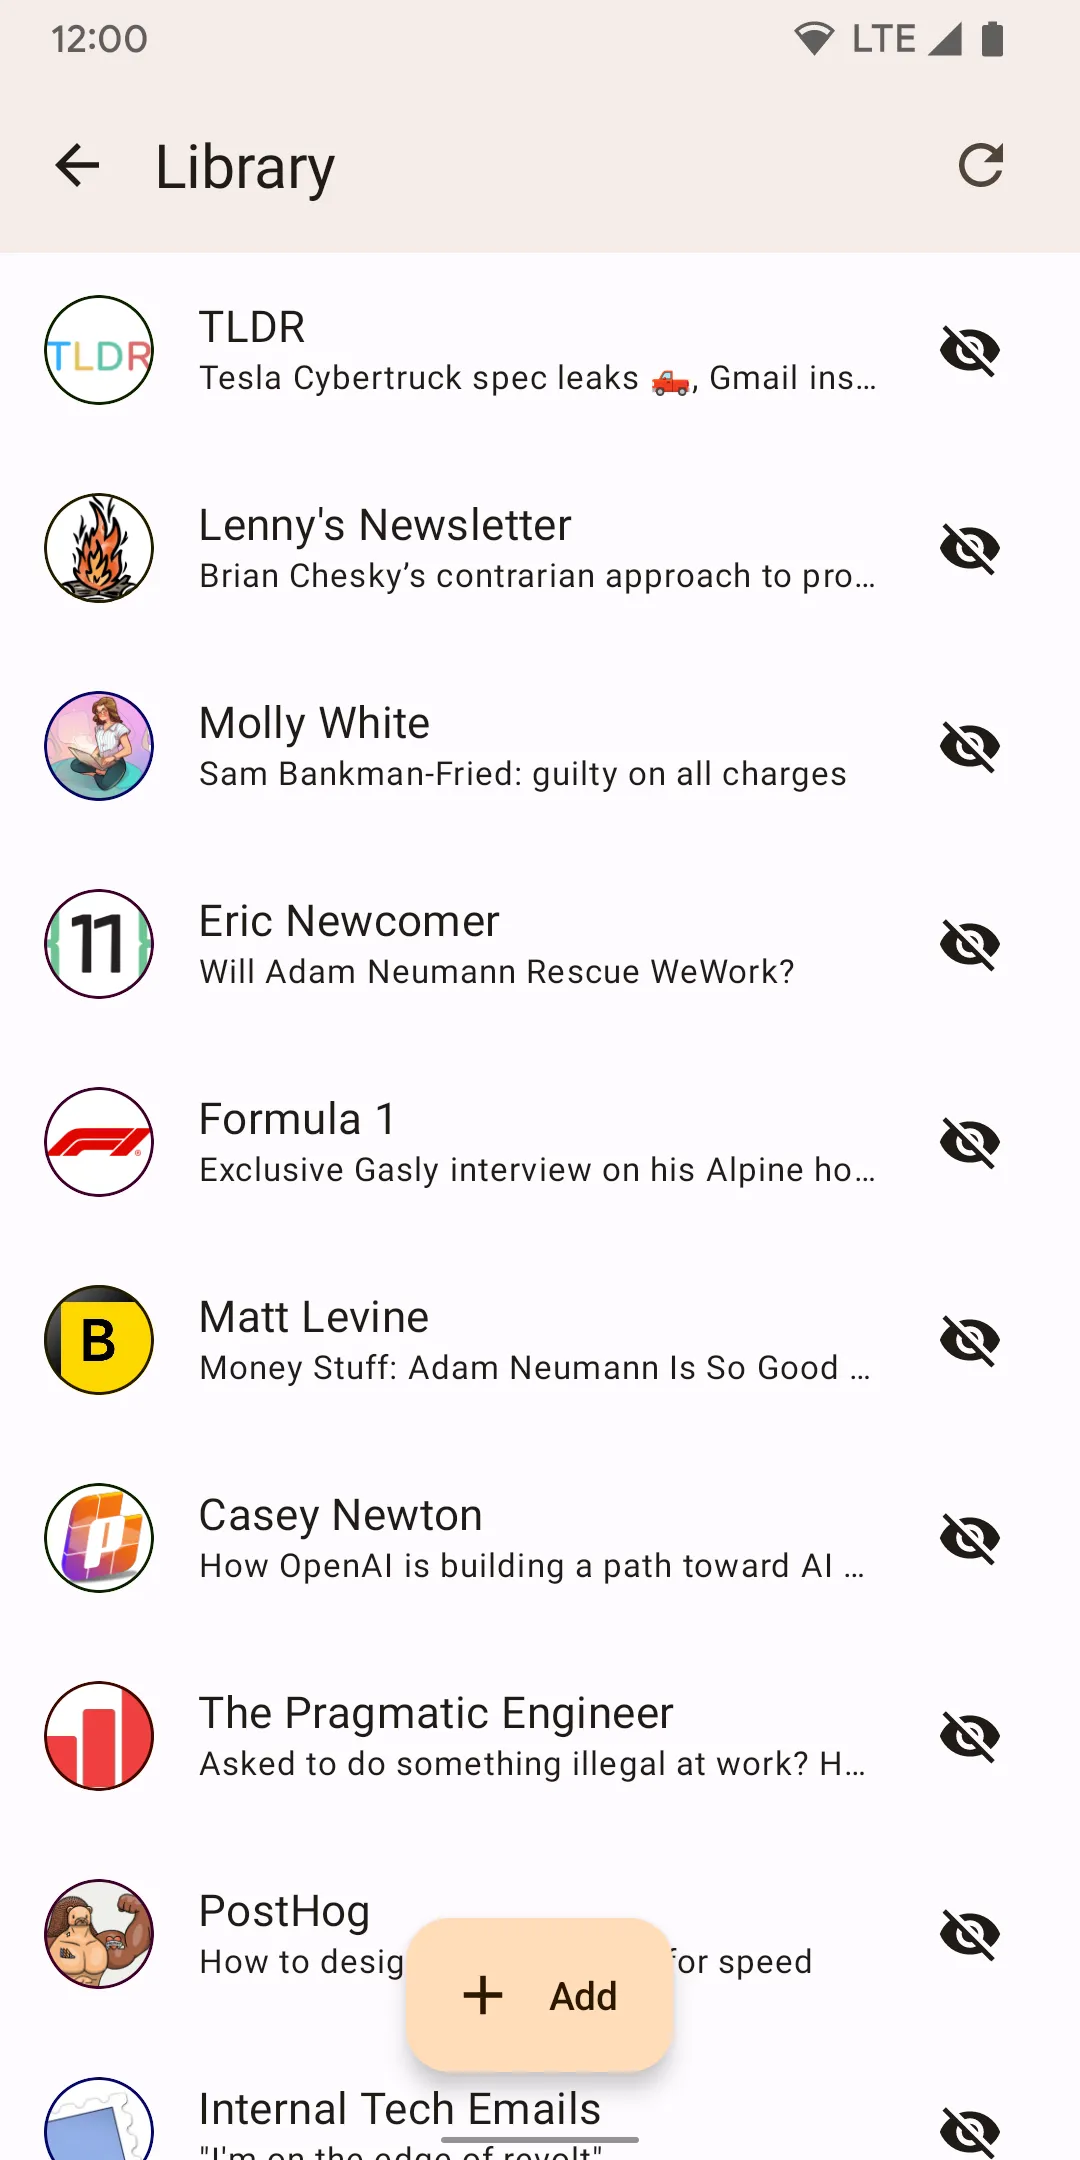 Screenshot of the Feedo app showing the list of email newsletters the user is subscribed to.